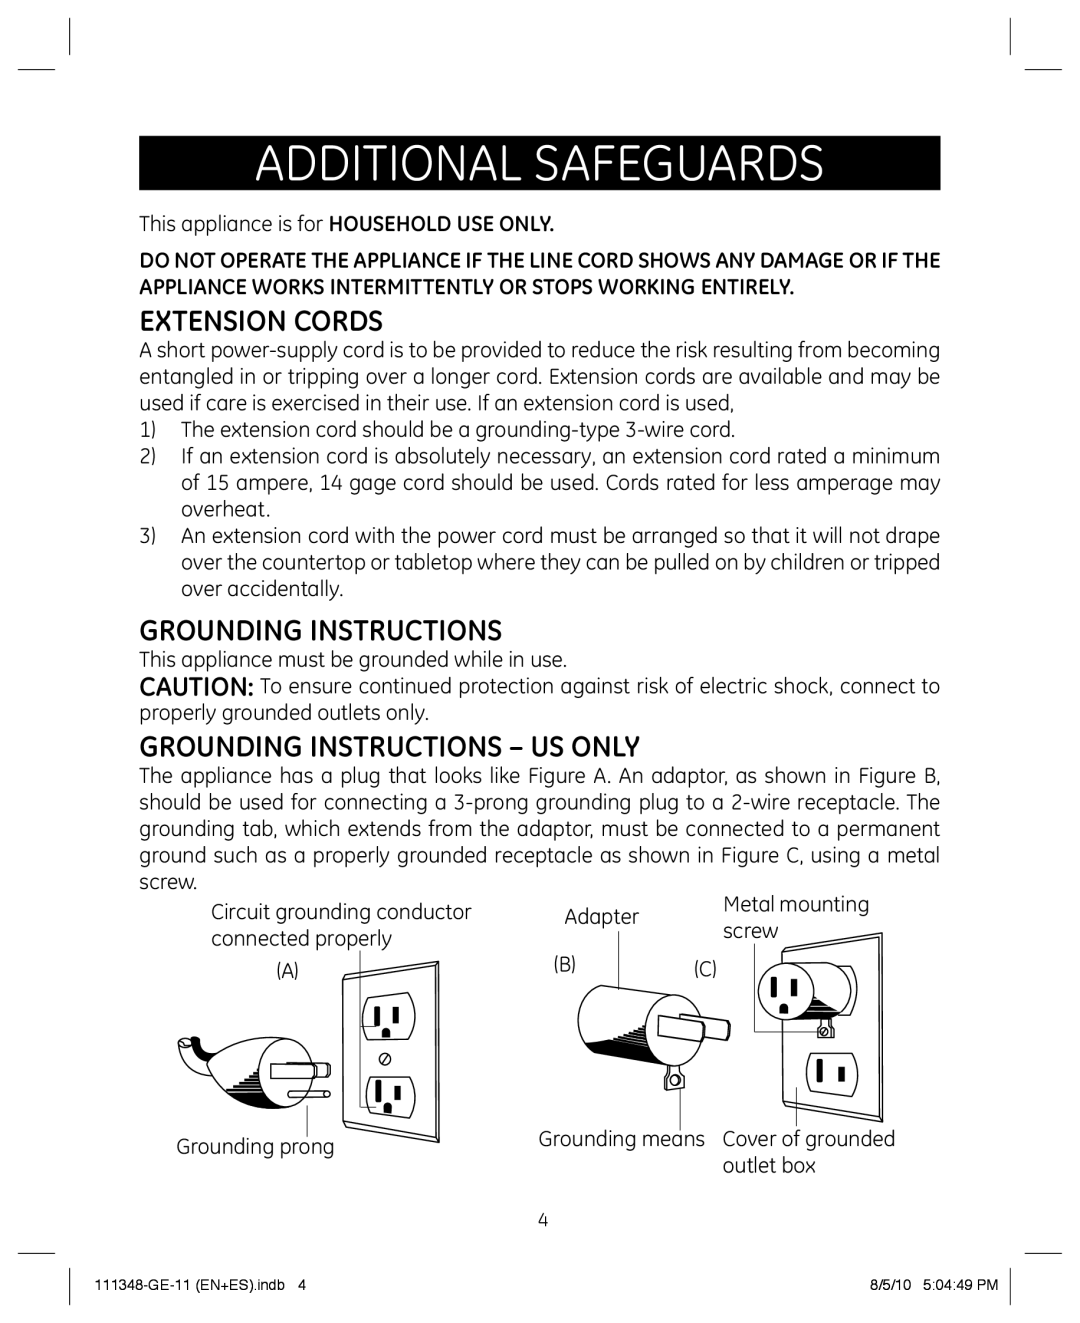 GE 898678 manual Additional Safeguards, Extension Cords, Grounding Instructions - Us Only 